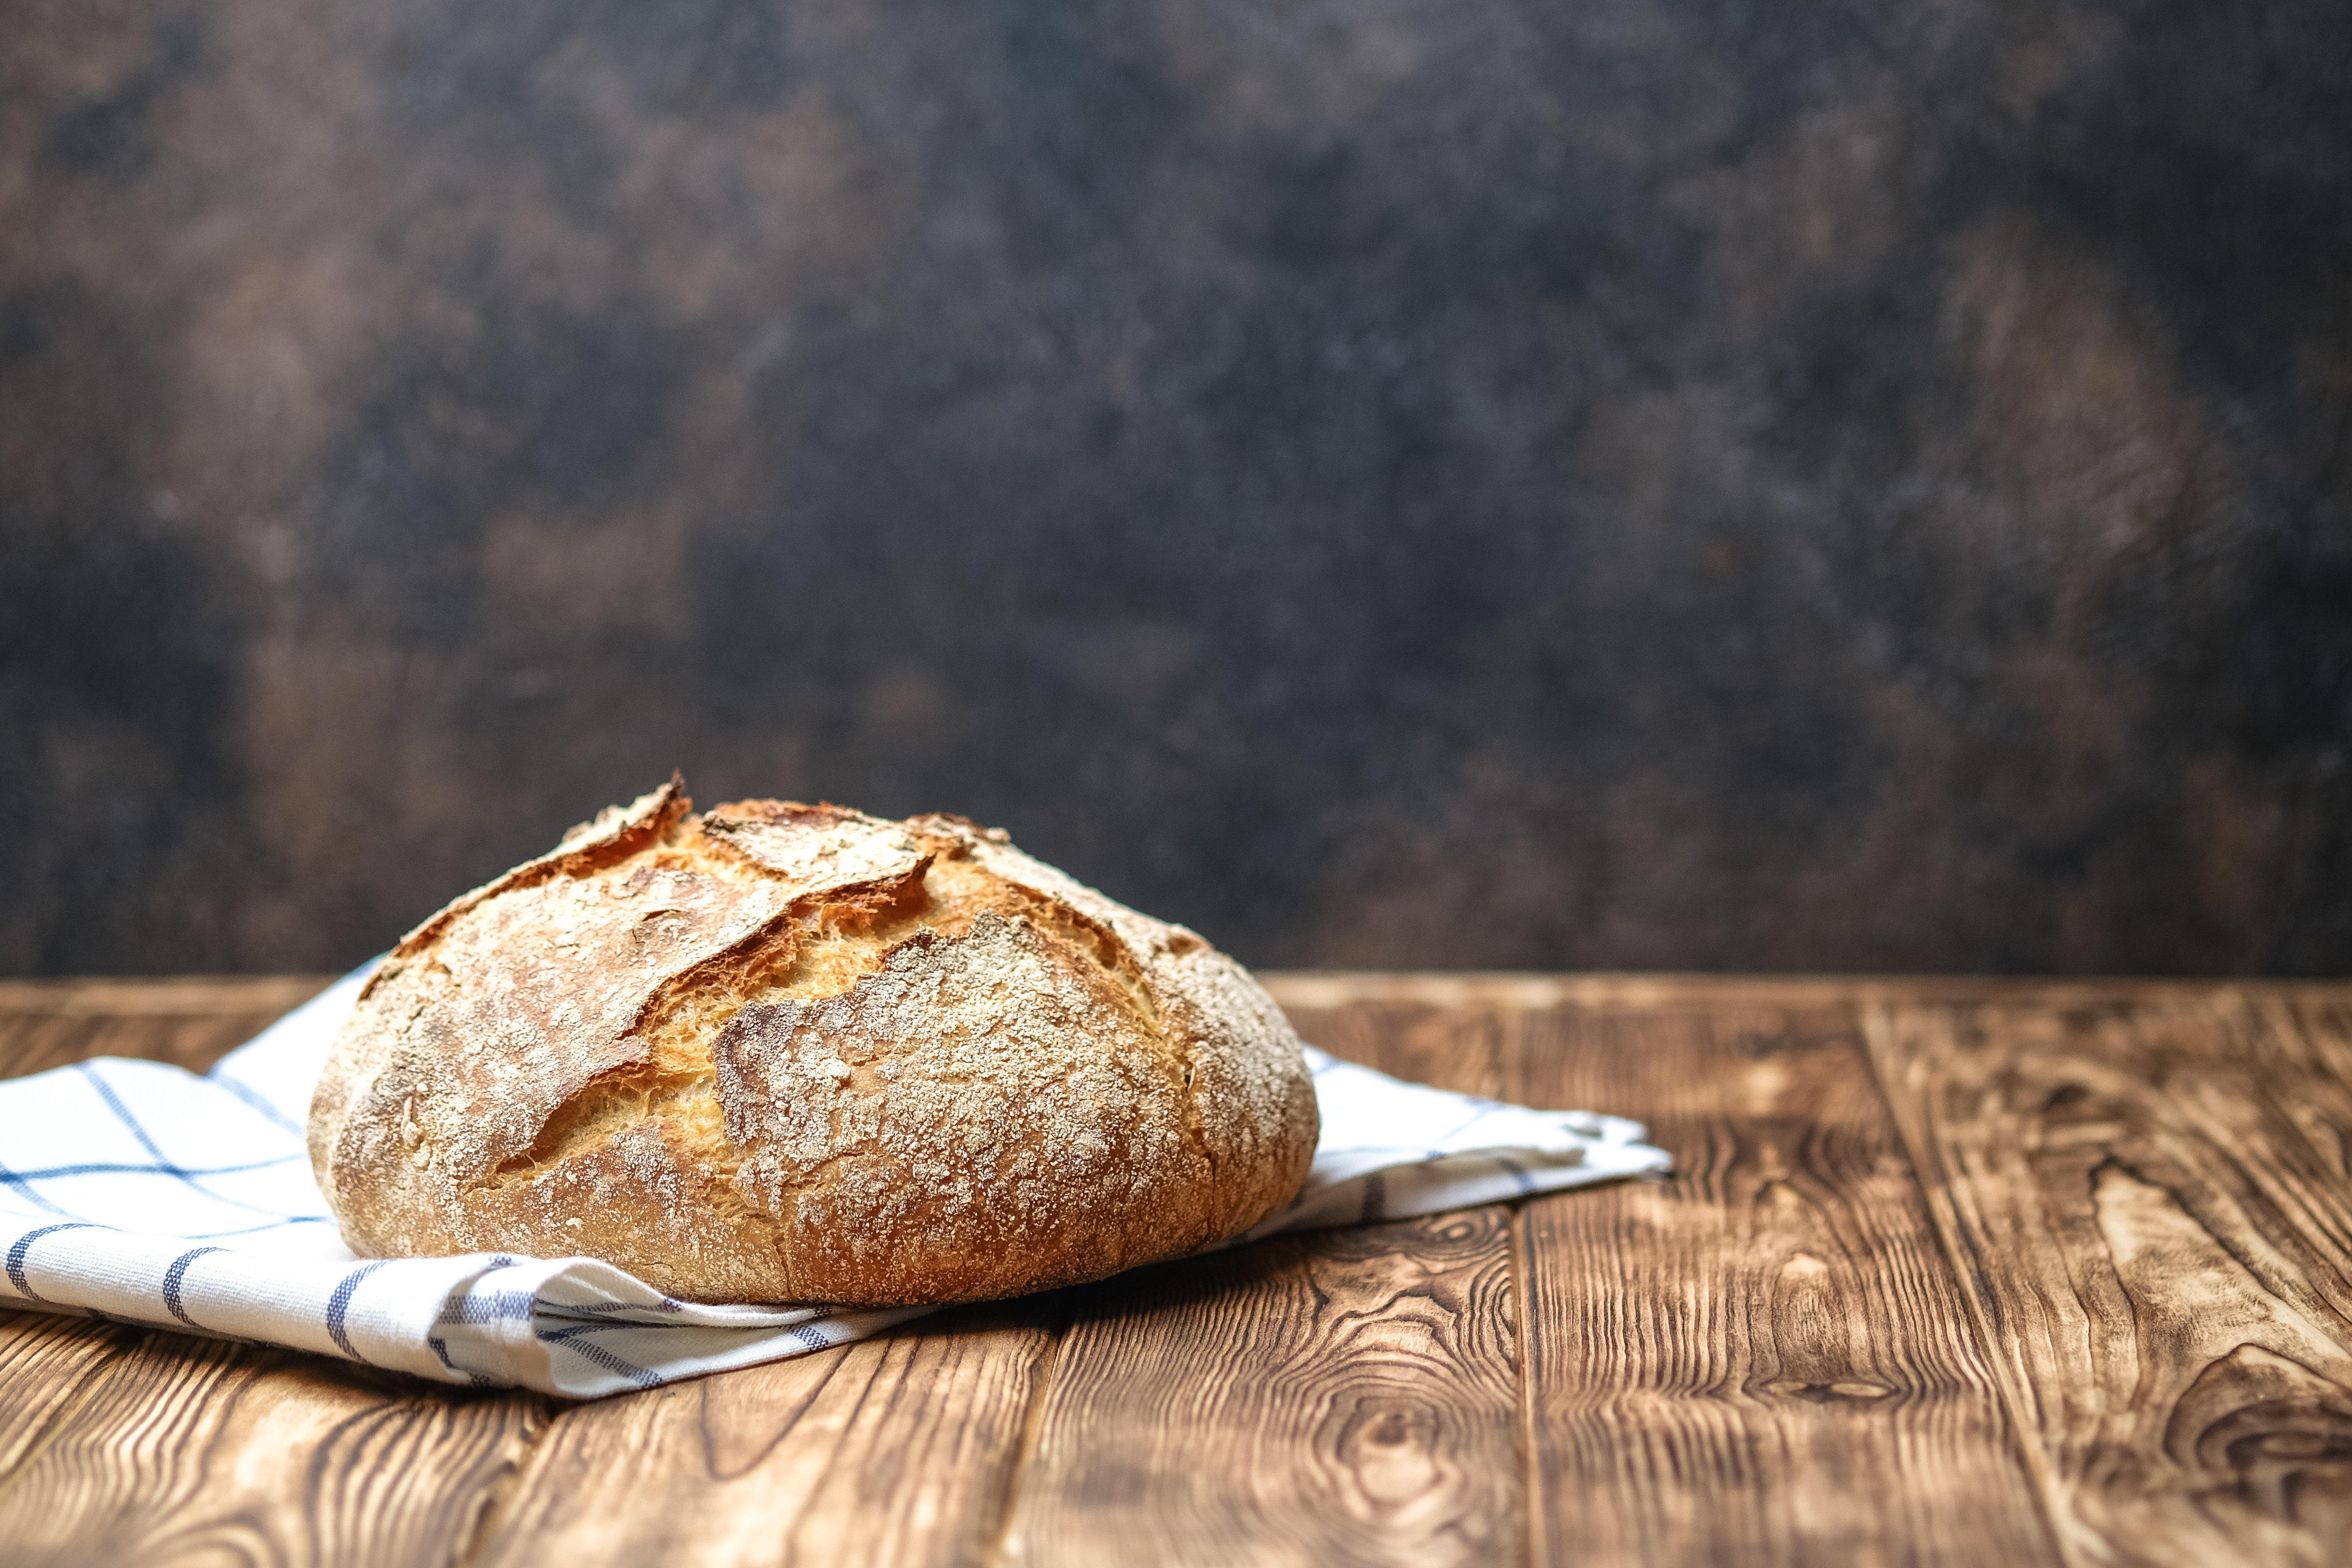 Bread on the table | Shutterstock